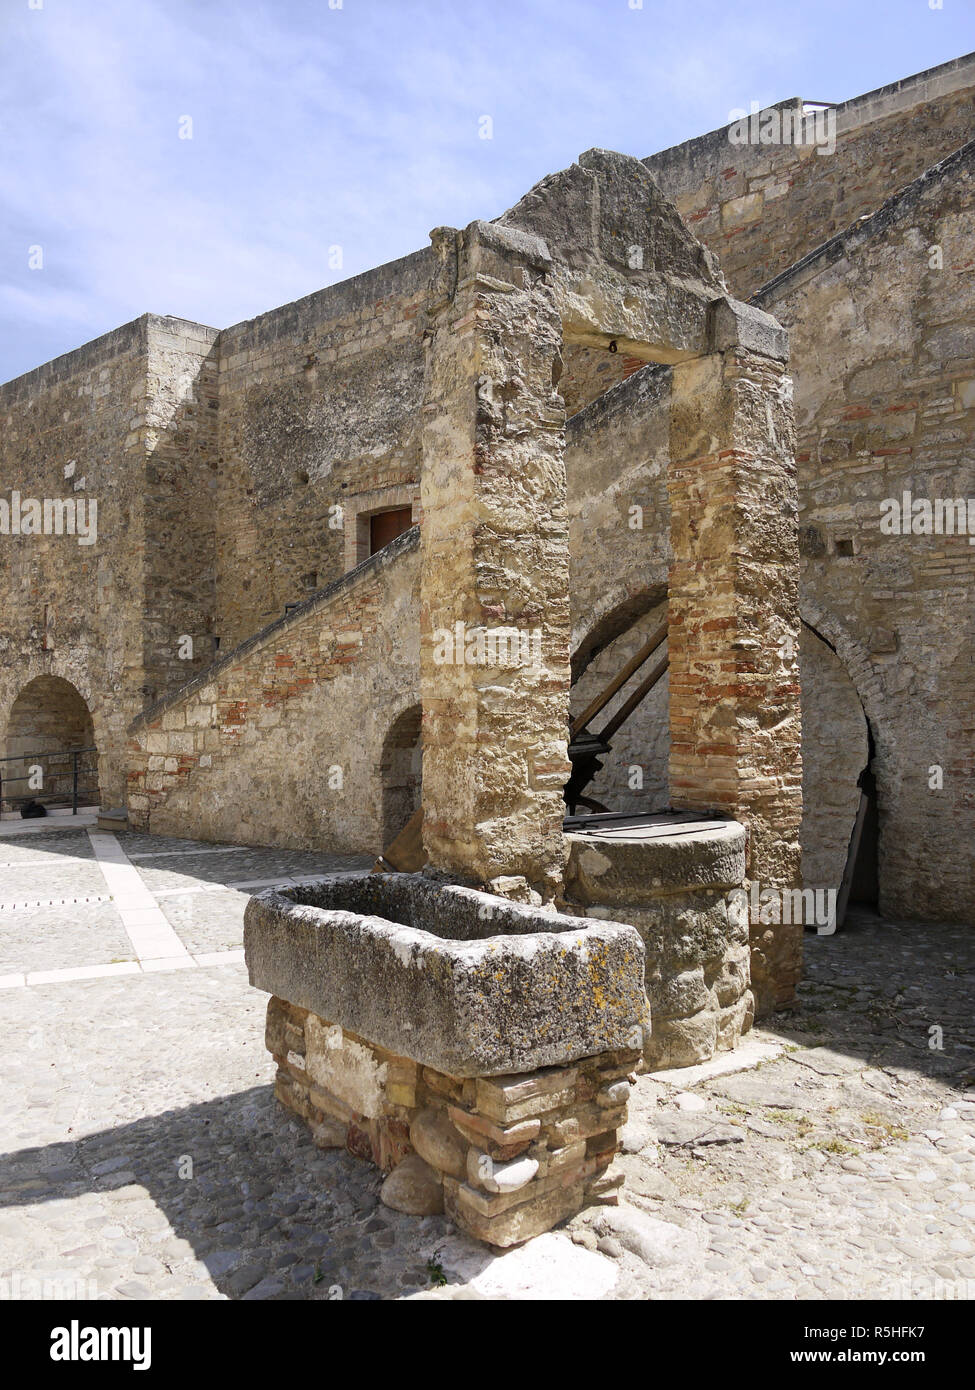 The hilltop town of Miglionico in Basilicata, Southern Italy with the Castello Malconsiglio and a water trough in the courtyard Stock Photo